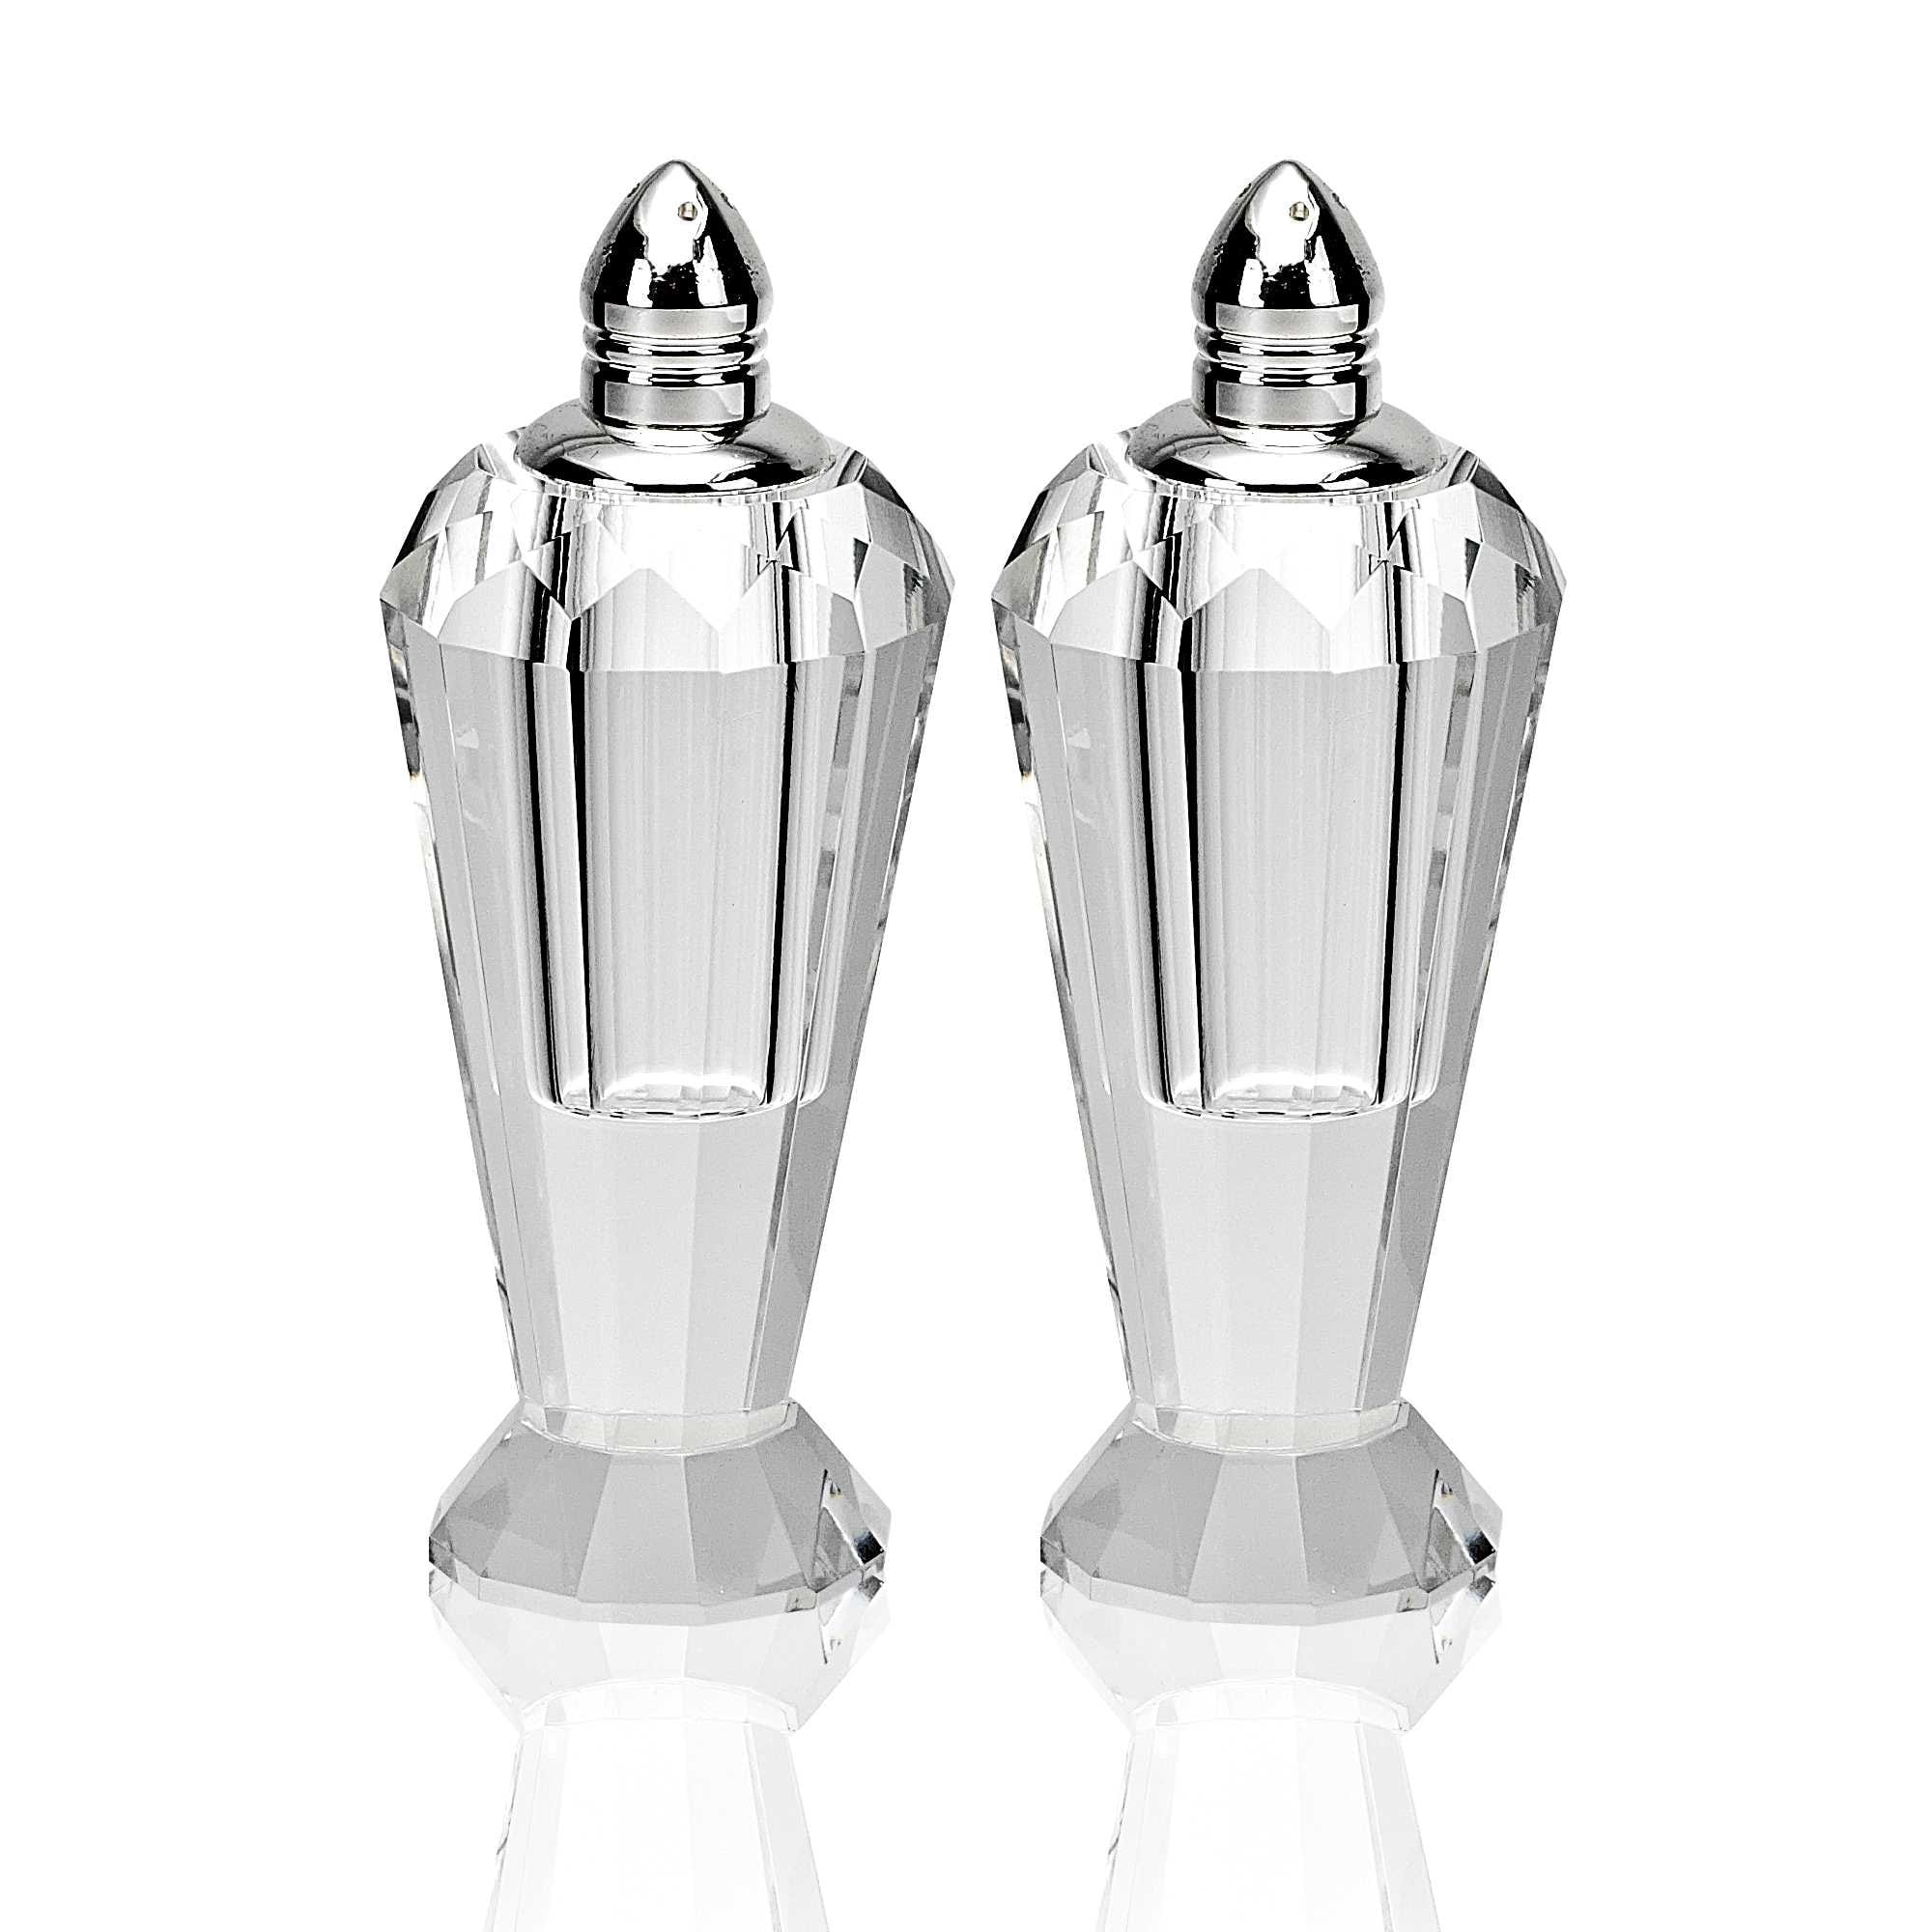 OXO Good Grips 2-in-1 Salt and Pepper Shaker,Silver